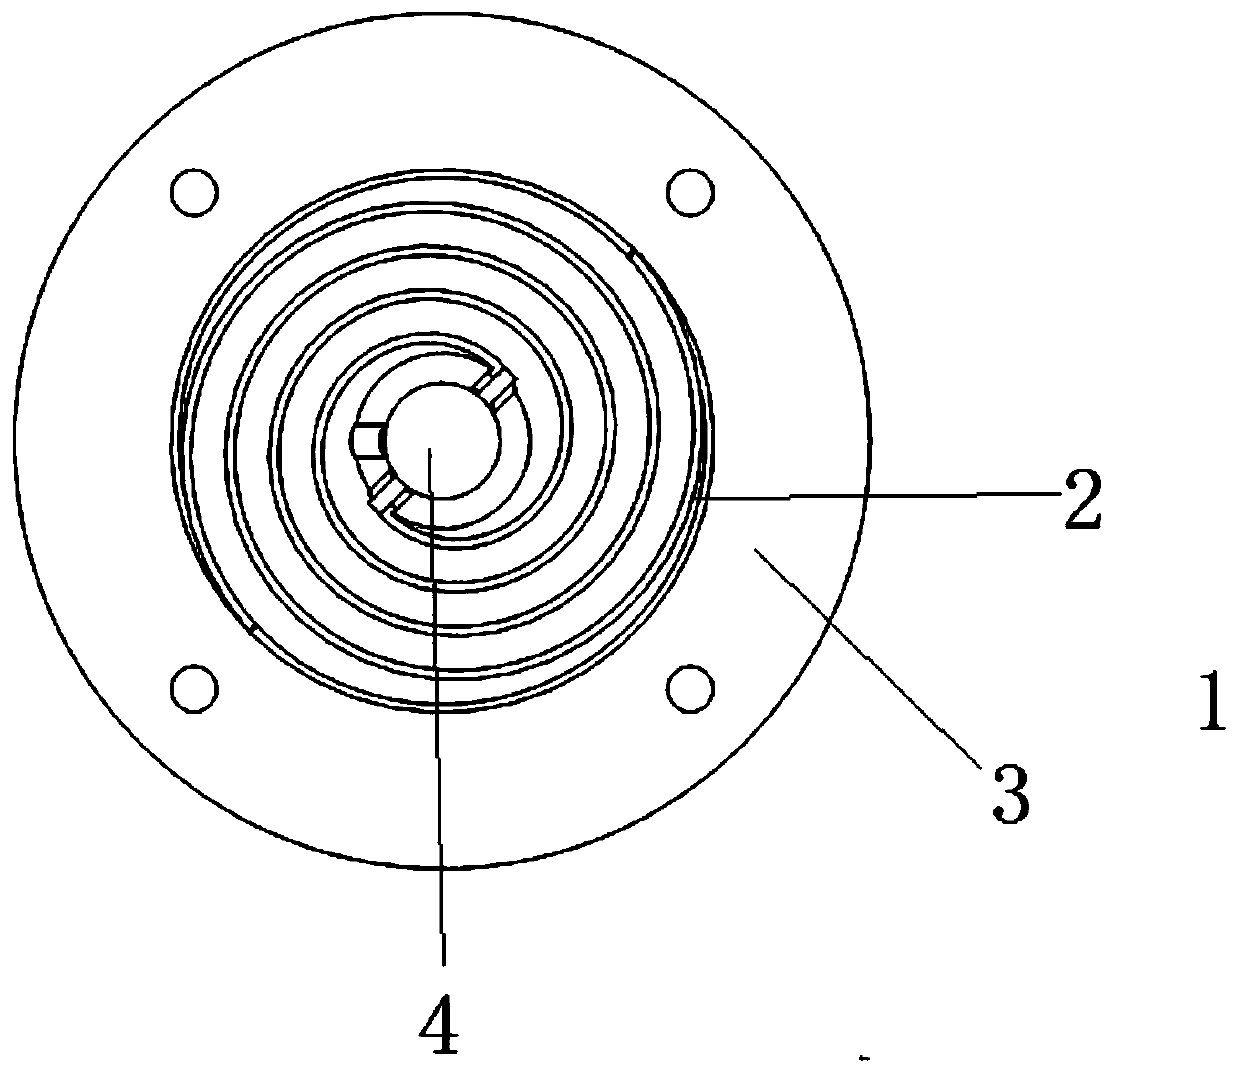 Pitch-variable spiral antenna